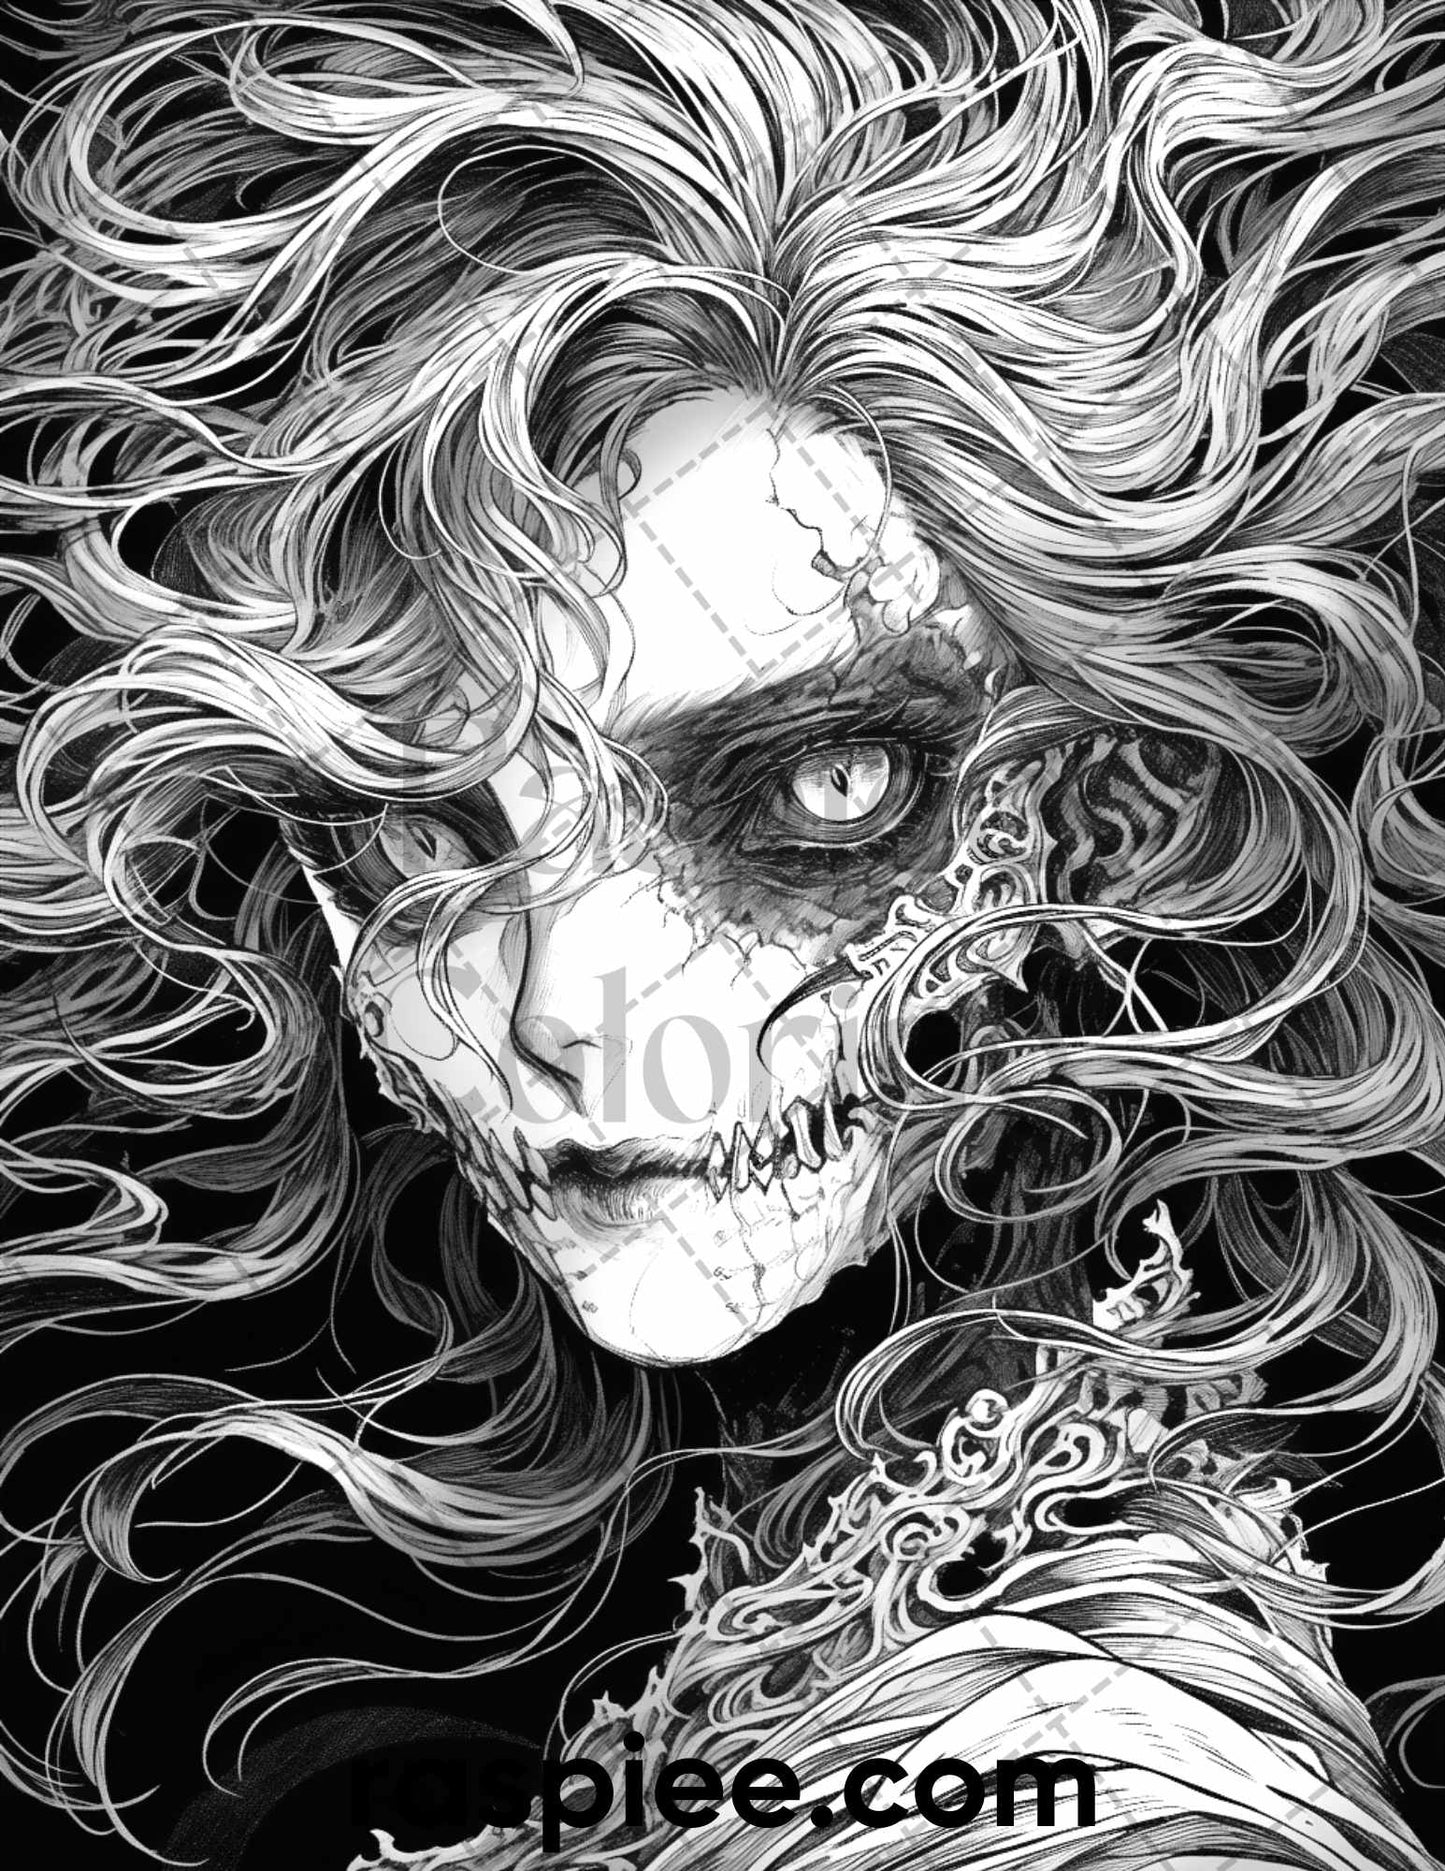 Grayscale Horror Coloring Pages, Adult Printable Coloring Sheets, Printable Gothic Coloring Pages, Mysterious Ladies in Scary Coloring, Horror Coloring Pages, Halloween Coloring Pages, Spooky Coloring Pages, October Coloring pages, Halloween Grayscale Coloring Pages, Halloween Coloring Sheets